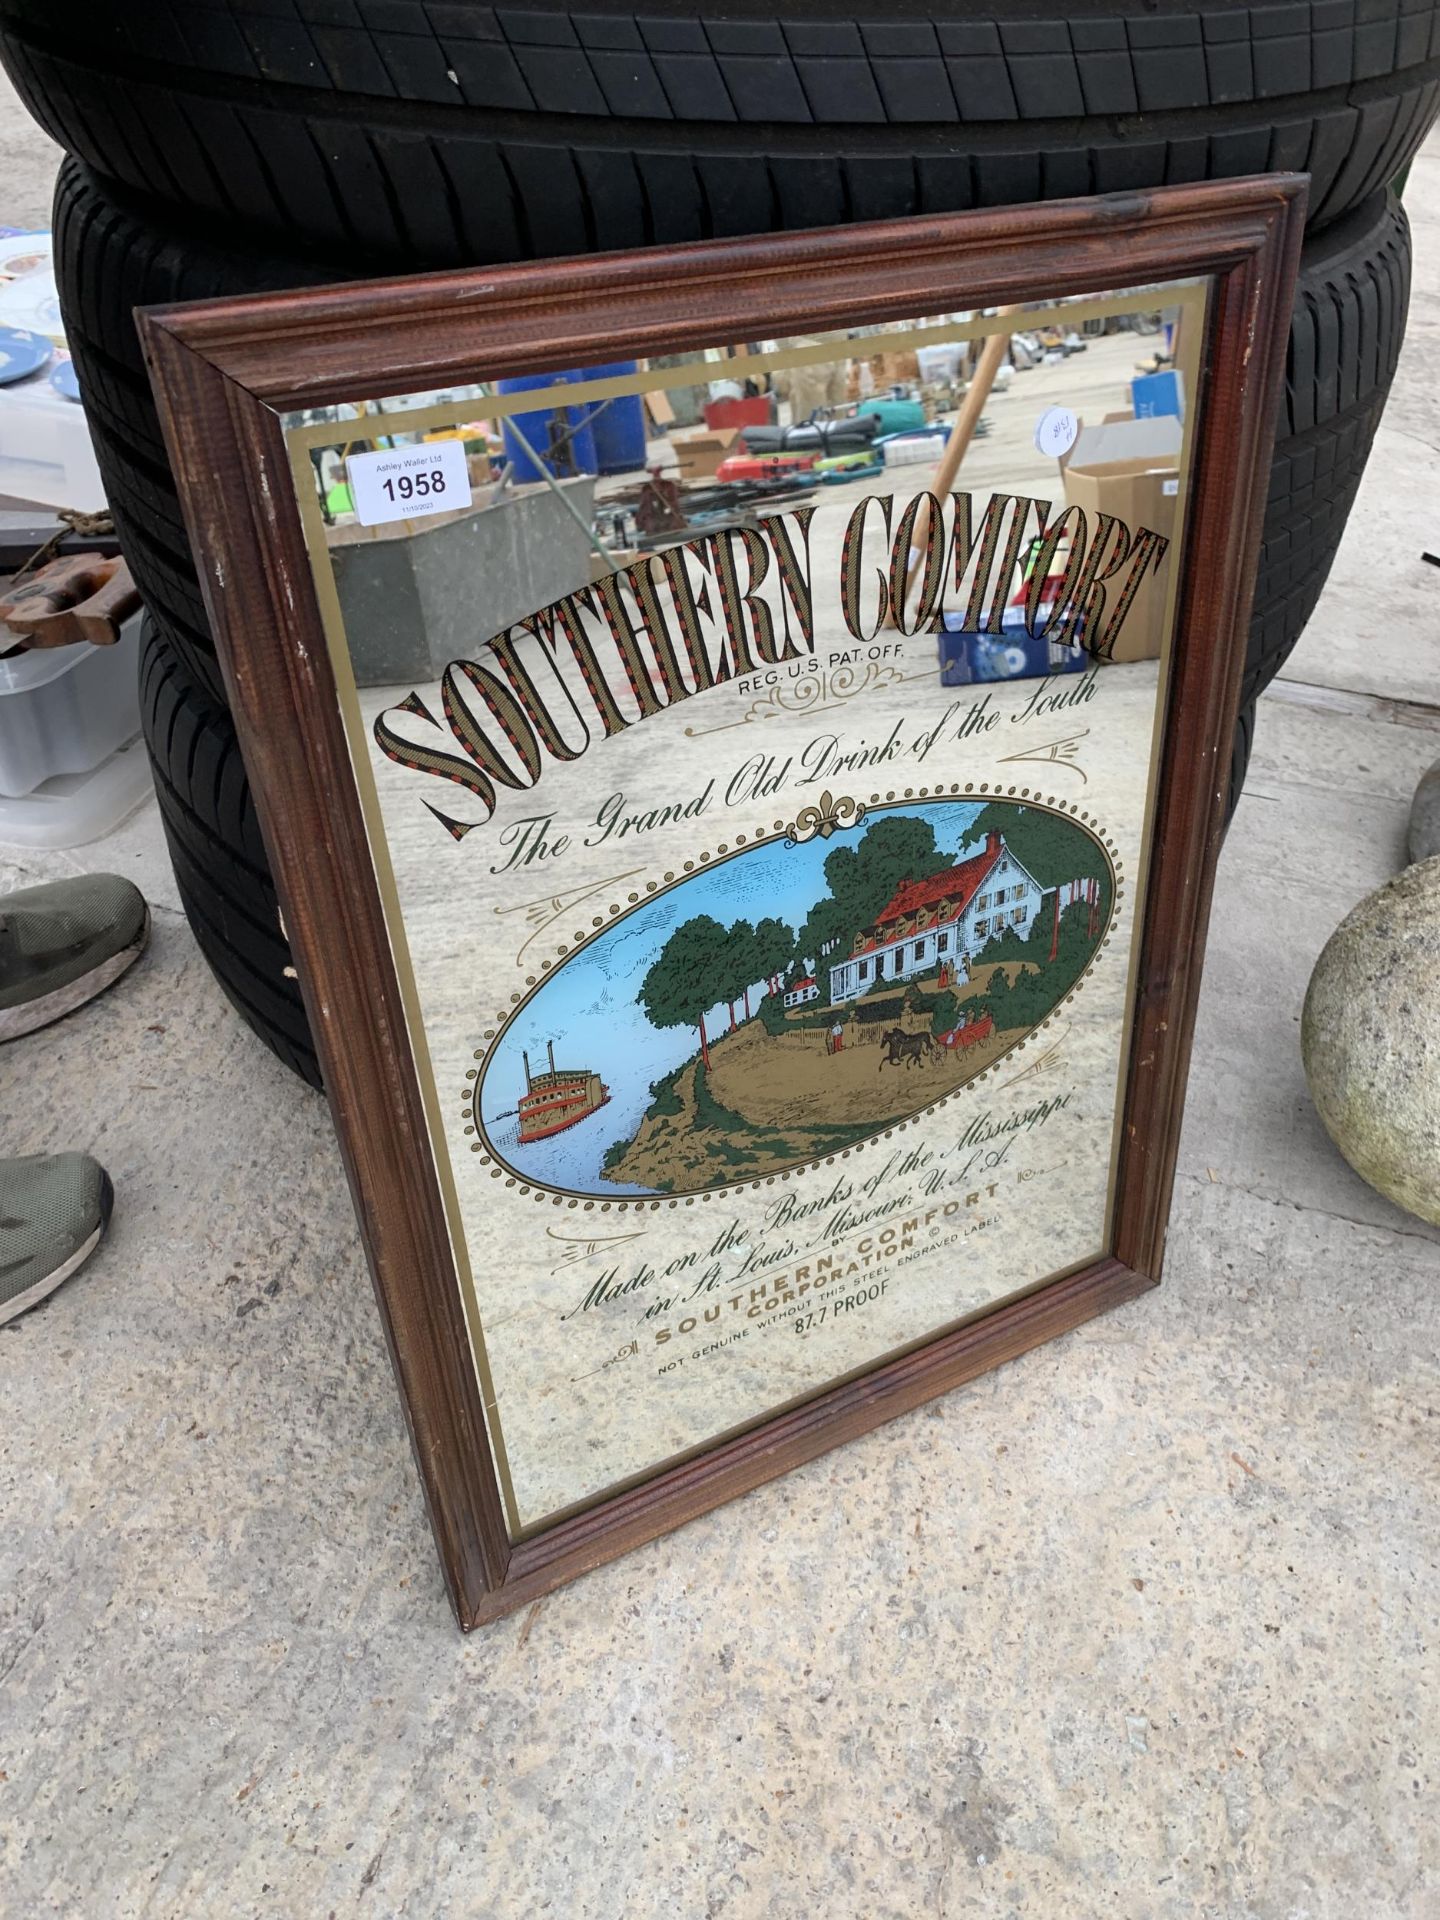 A FRAMED SOUTHERN COMFORT ADVERTISING MIRROR